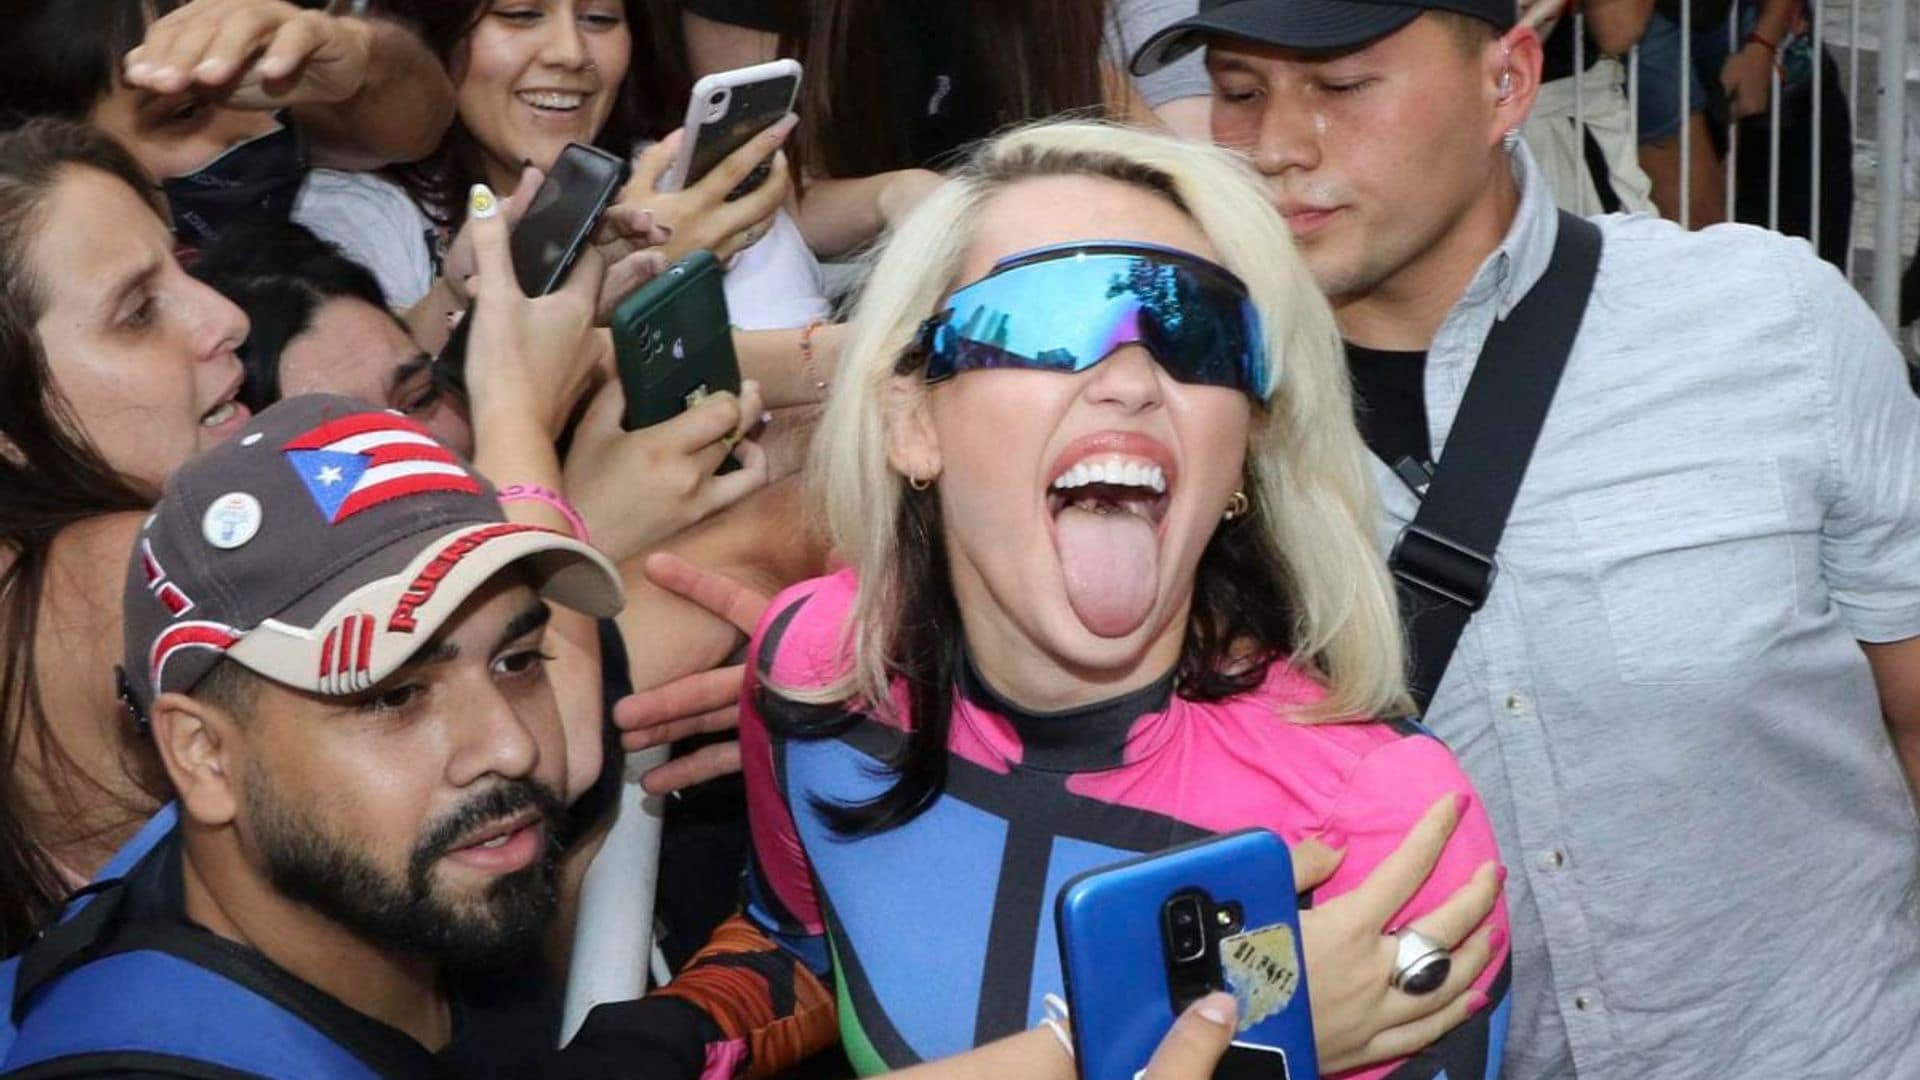 Miley Cyrus poses and takes selfies with fans as hundreds filled the streets in Argentina for her arrival